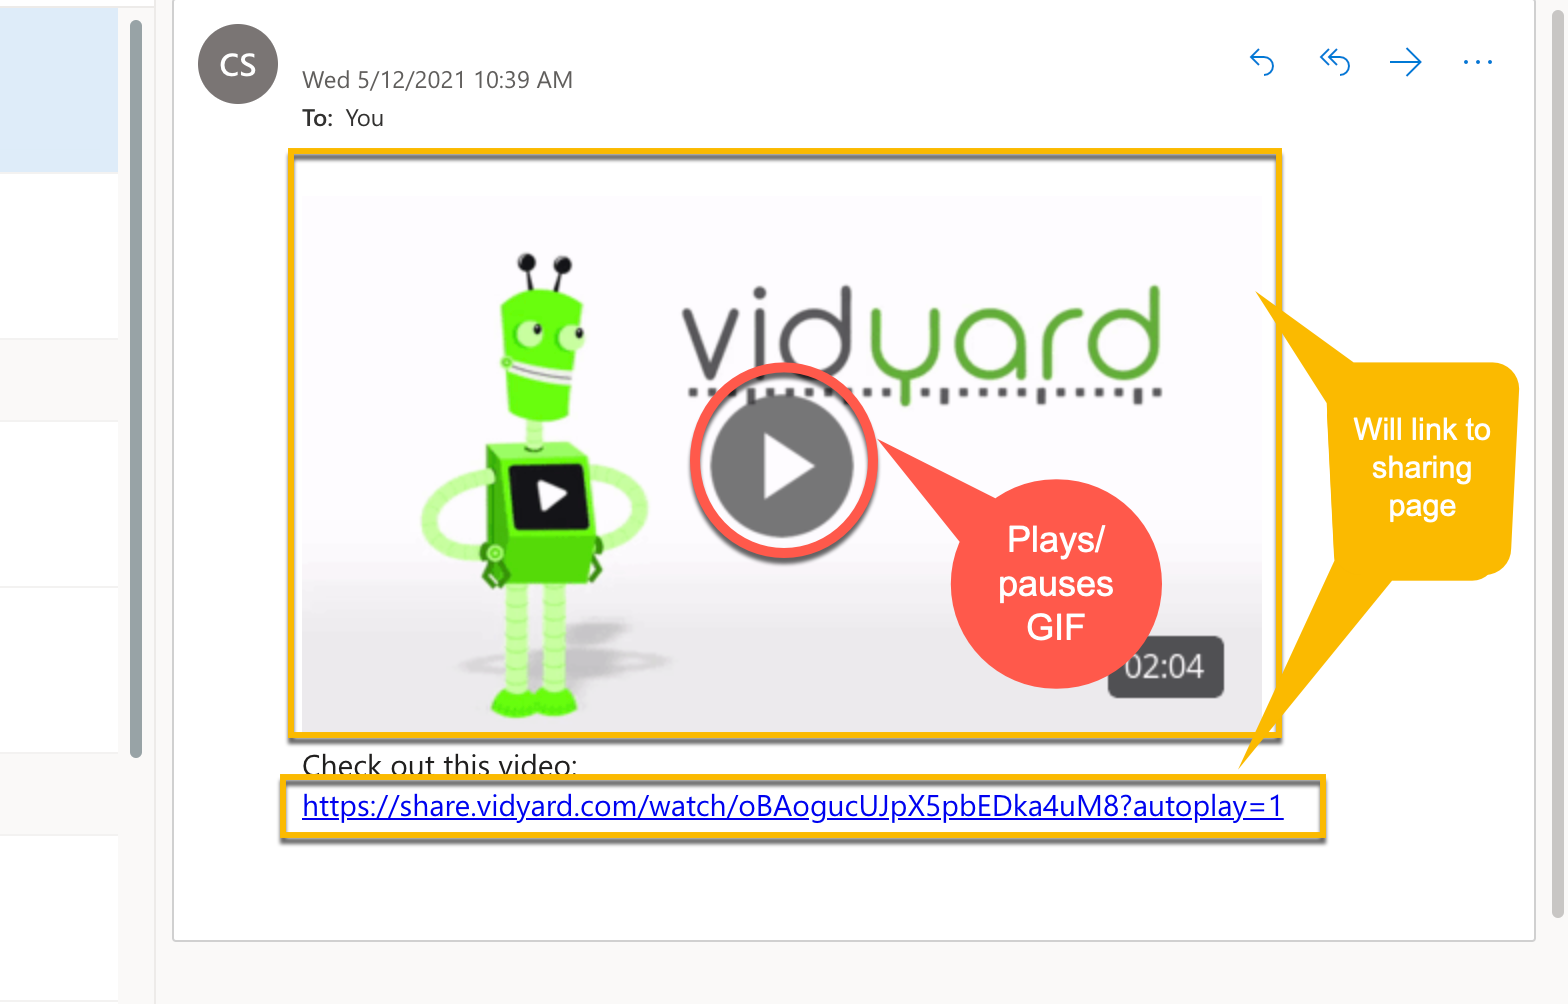 Outlook compose window with Vidyard video showing which parts of thumbnail will link to sharing page